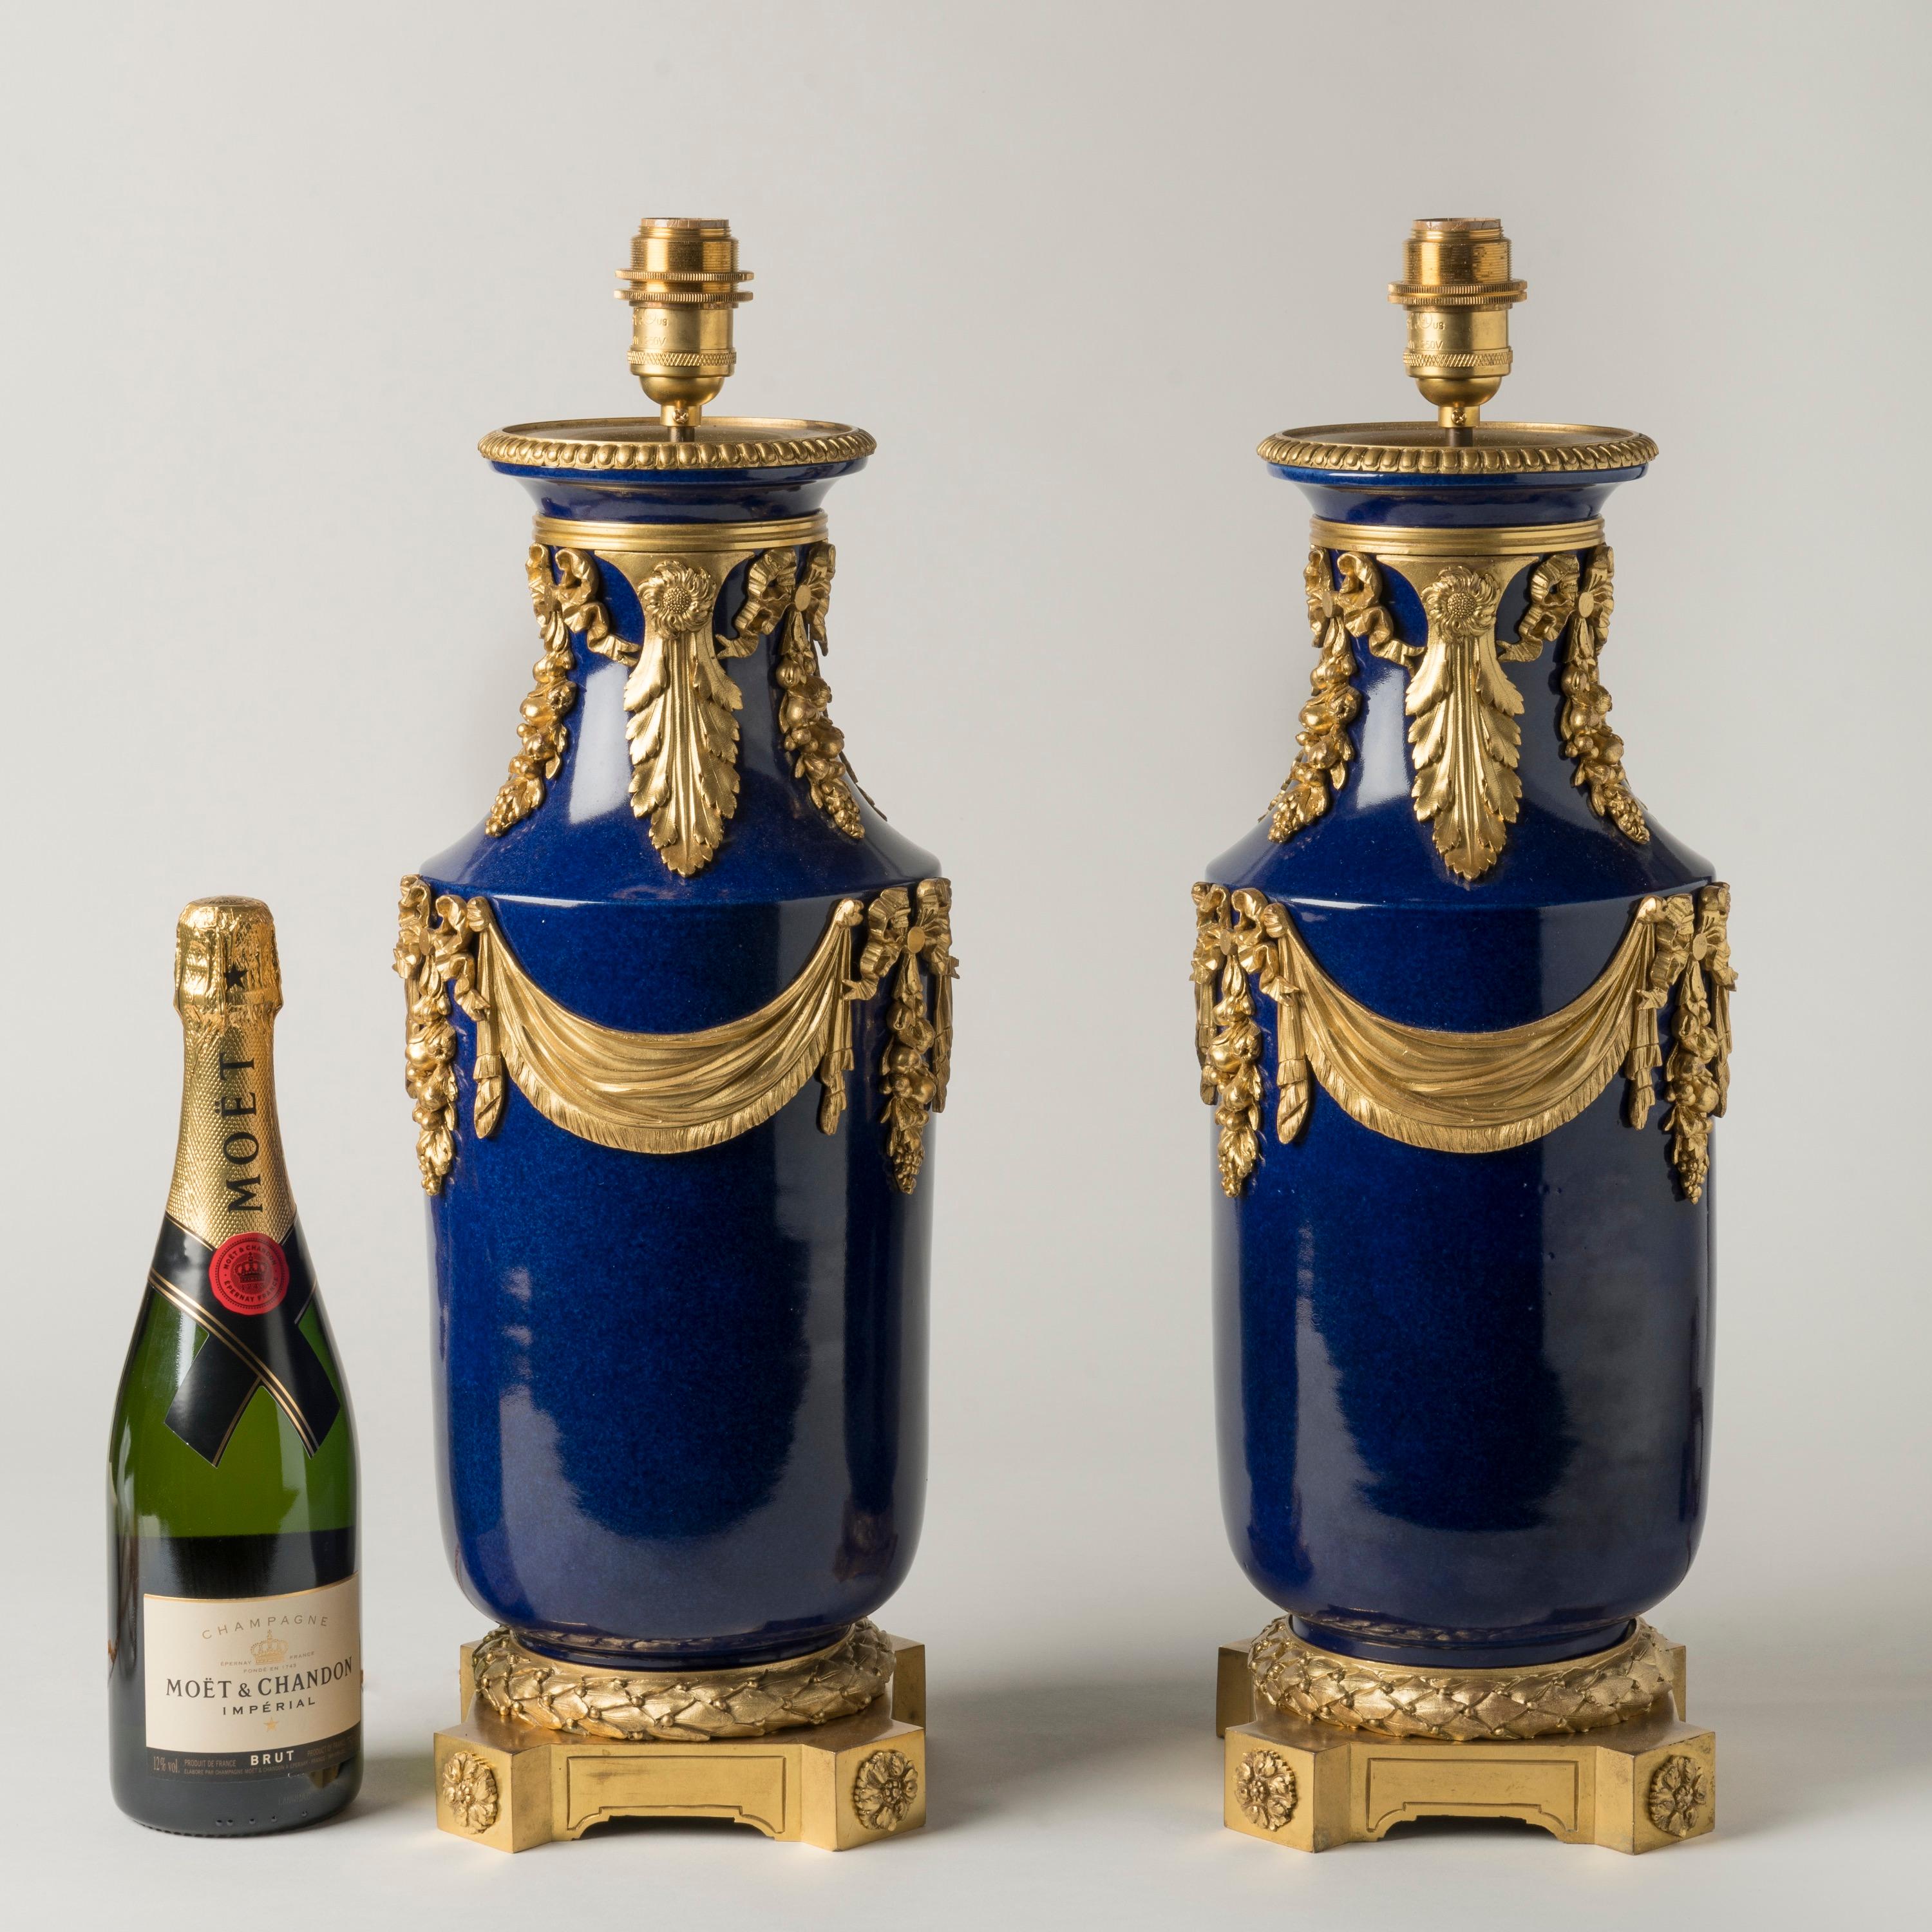 A Pair of Ormolu-Mounted Blue Porcelain Lamps
In the Louis XVI Style

The cobalt blue porcelain vases tastefully mounted with gilt bronze draped swags, ribbon-tied bunches of fruit, and acanthus-leaves, the bases also of ormolu, with everted corners